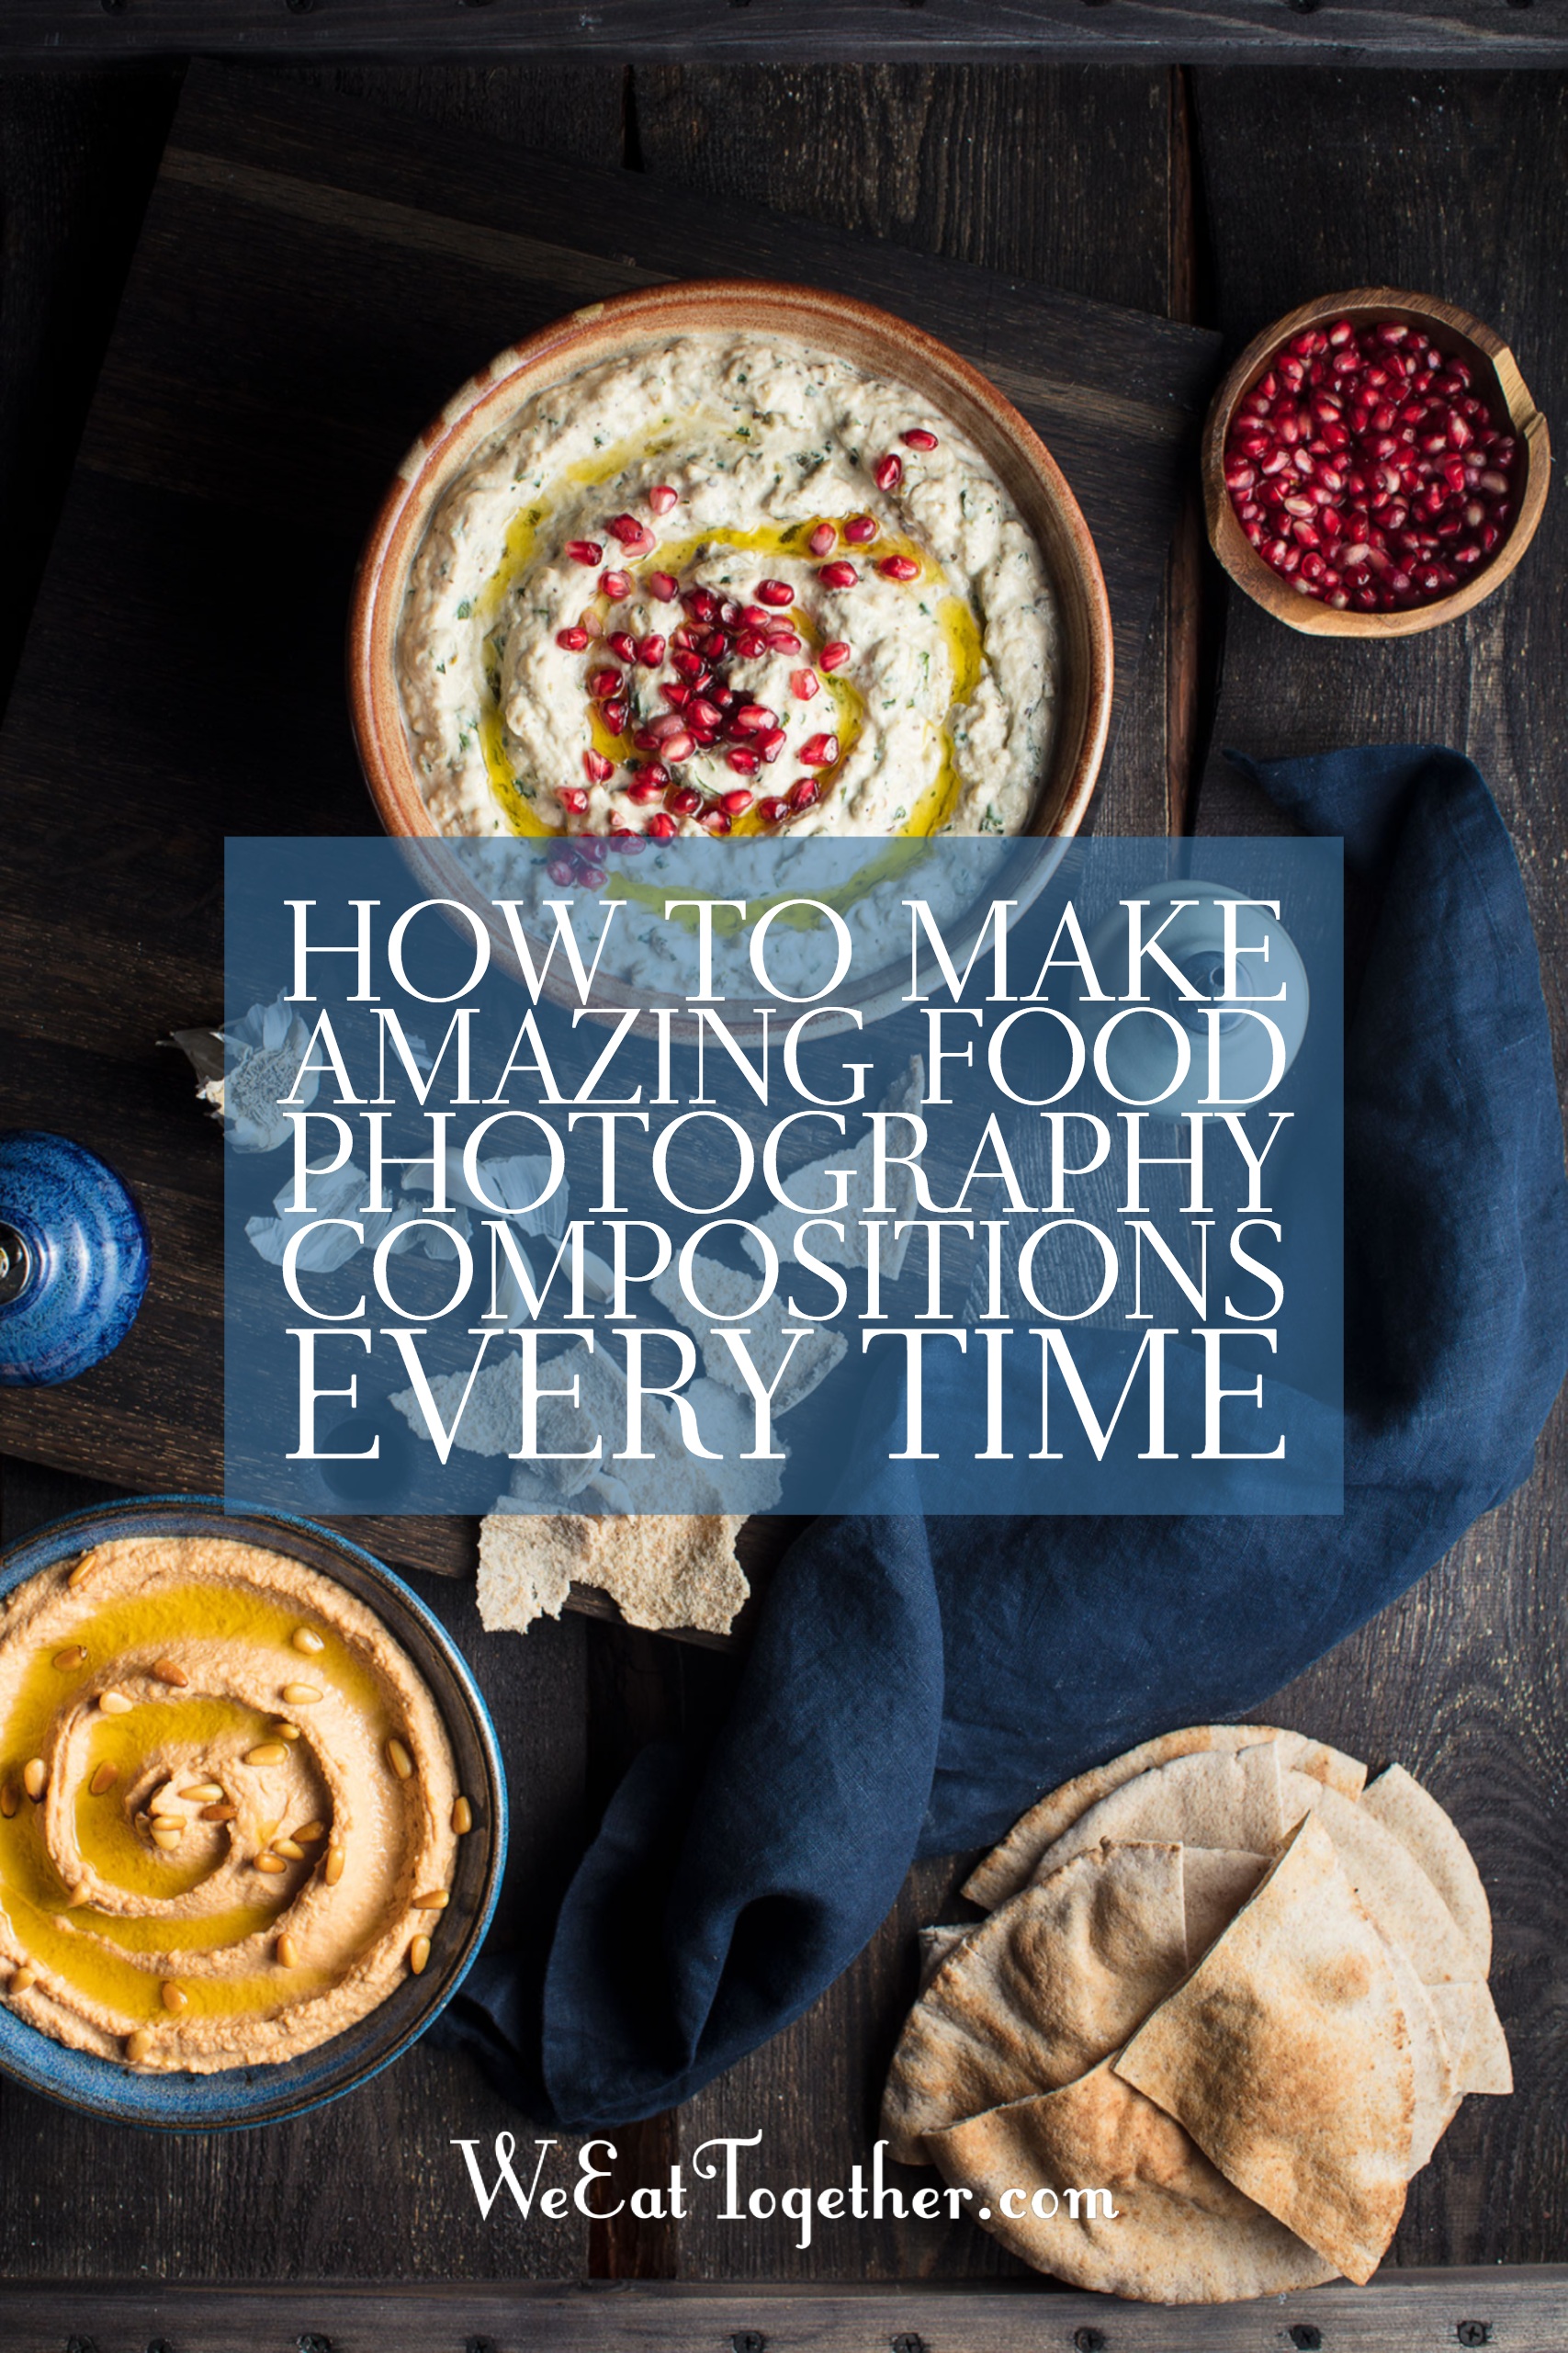 From simple to complex scenes, Food Photography Composition is actually my true love. Let me show you how to make quick and amazing compositions every time